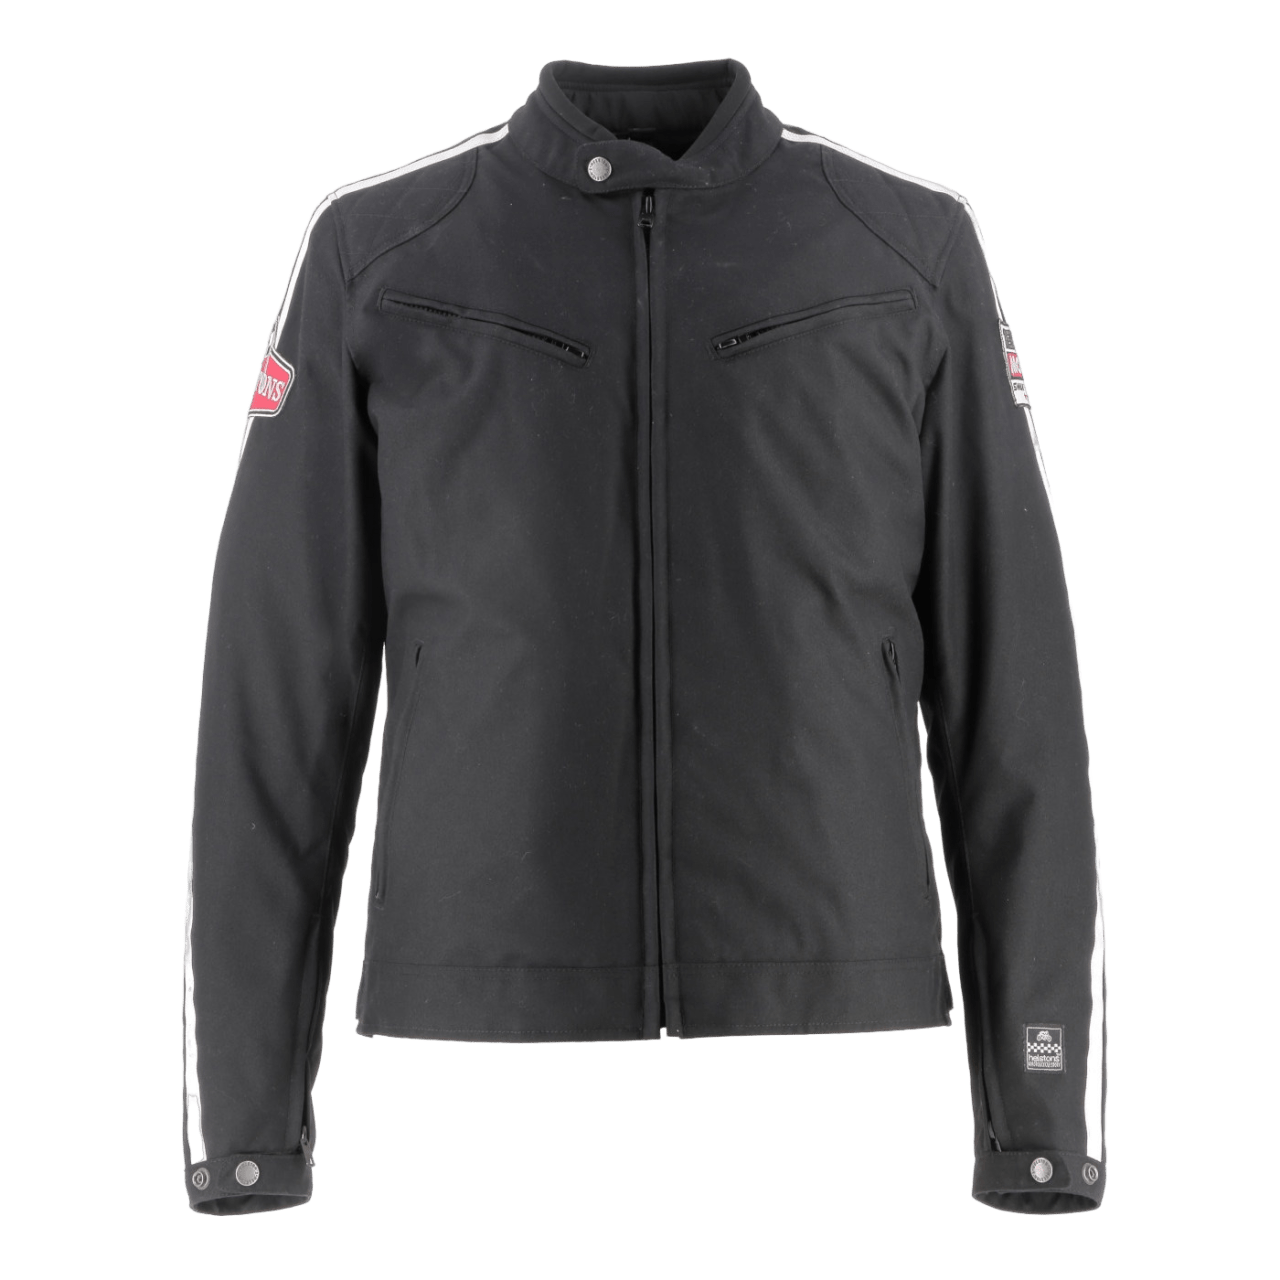 207790 Combining modernity and style, this lightweight jacket, created in collaboration with the renowned brand of motorcycle oils, Motul, embraces a breathable fabric that keeps you cool during the summer months.